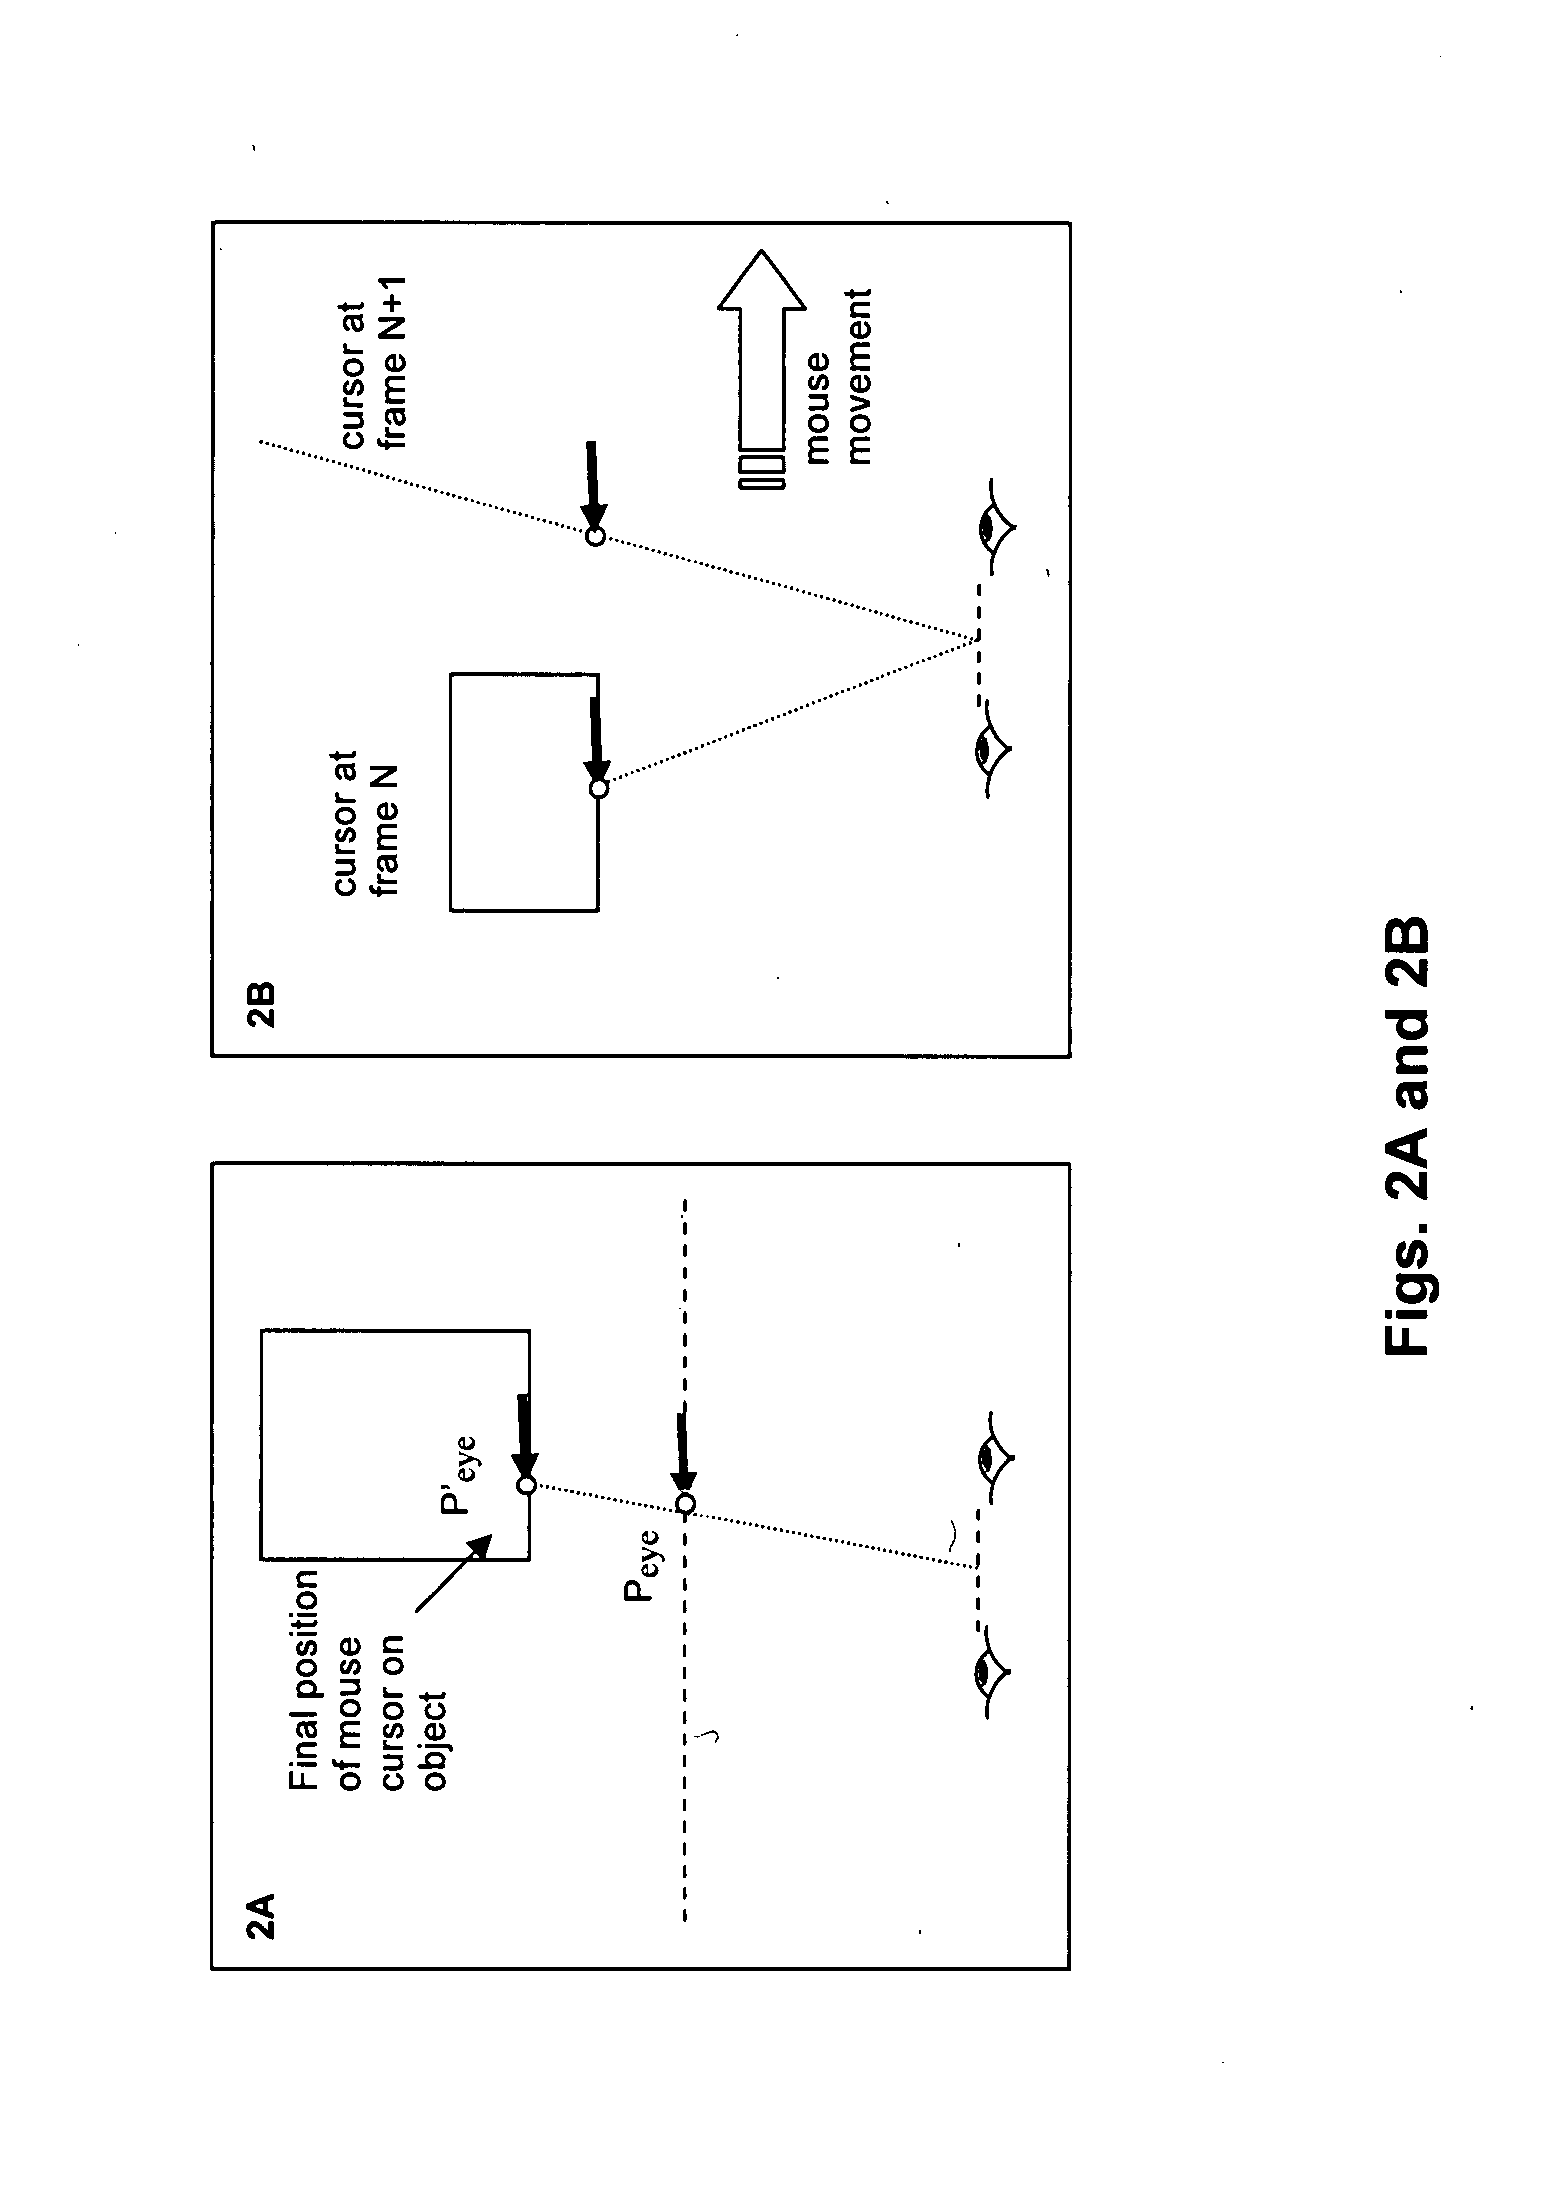 Methods and systems for interacting with a 3D visualization system using a 2D interface ("DextroLap")